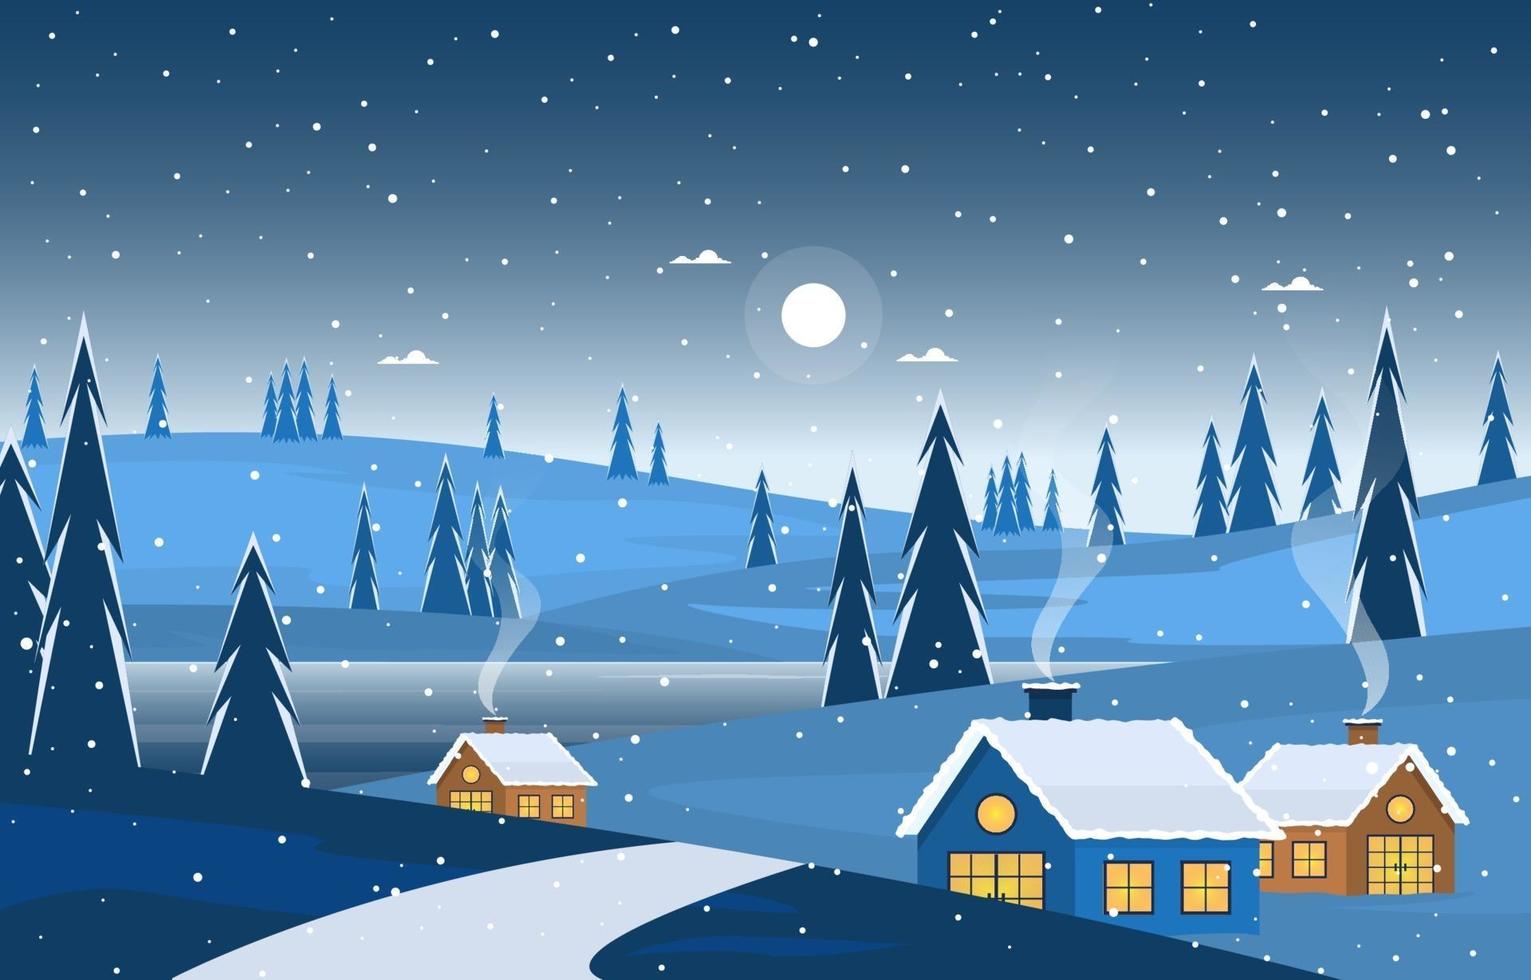 Cozy Winter Night Scene with Trees, Cottages, and Hills